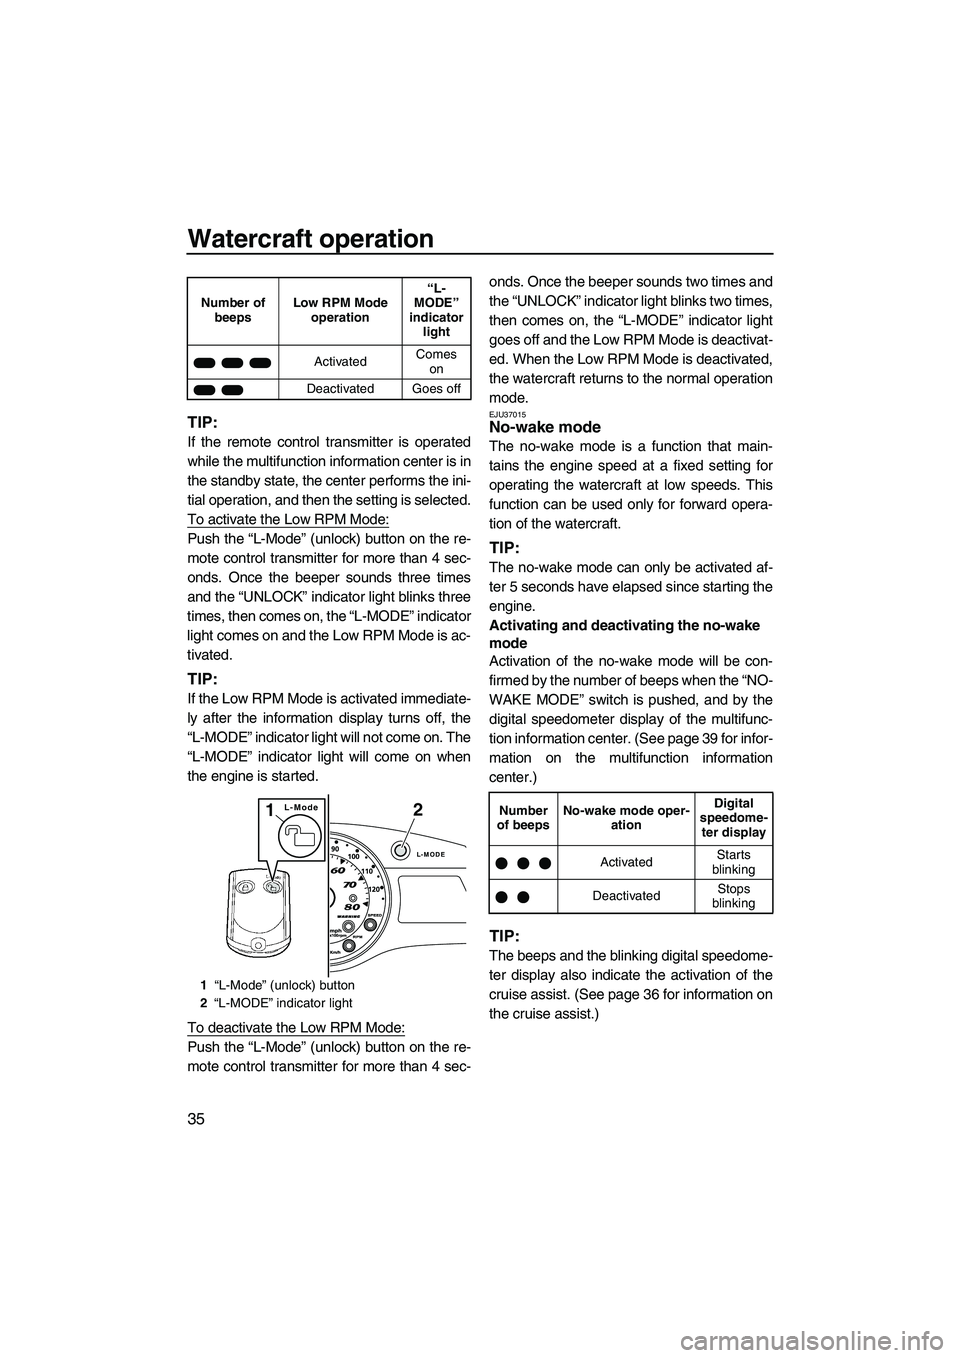 YAMAHA FX HO 2010  Owners Manual Watercraft operation
35
TIP:
If the remote control transmitter is operated
while the multifunction information center is in
the standby state, the center performs the ini-
tial operation, and then the